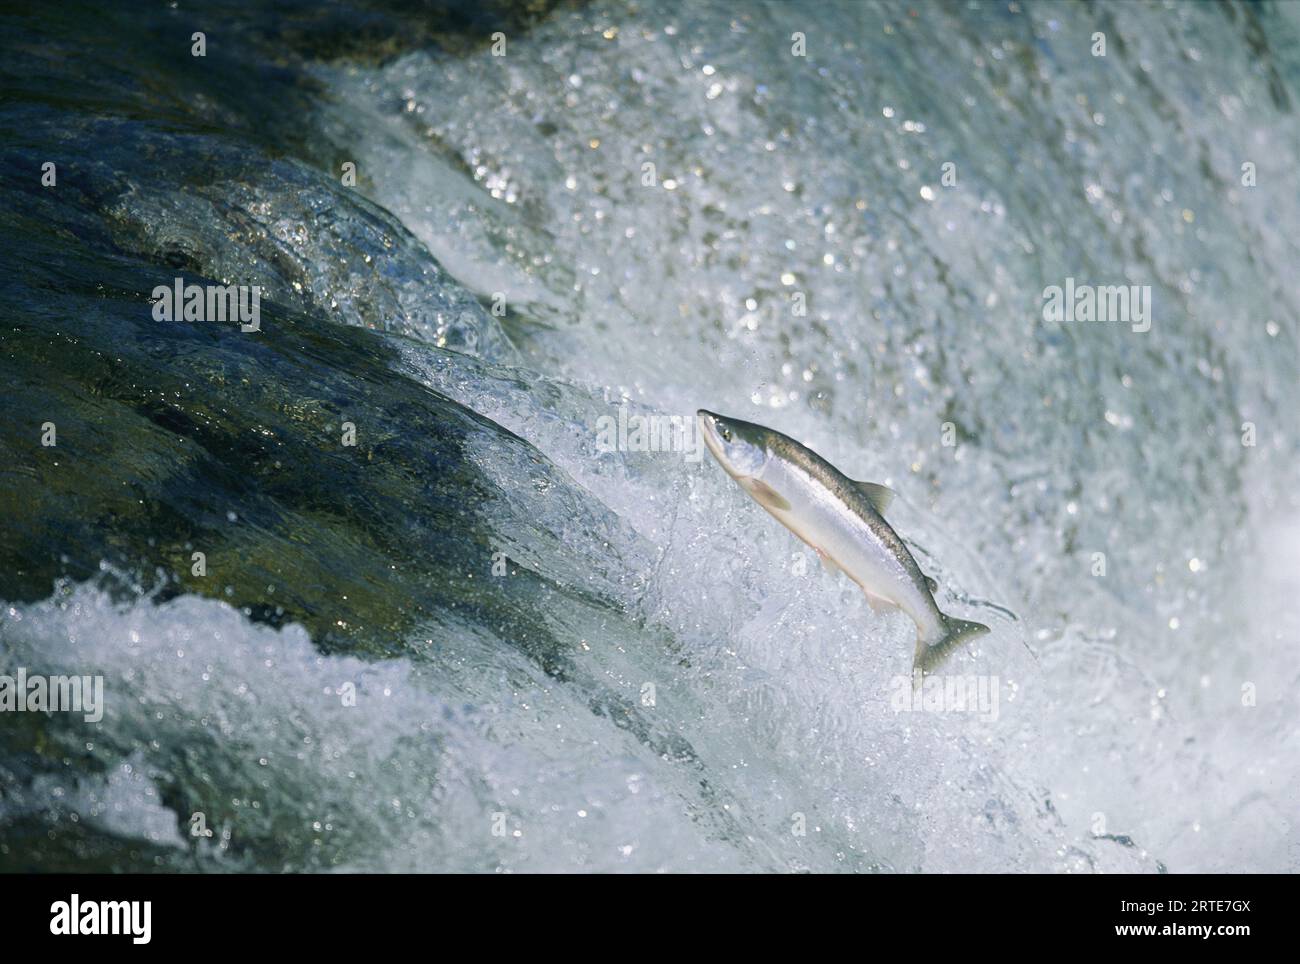 Salmon make the difficult trip up river, some traveling 50-60 miles a day to reach an area where they will spawn, which, as it turns out is usually... Stock Photo